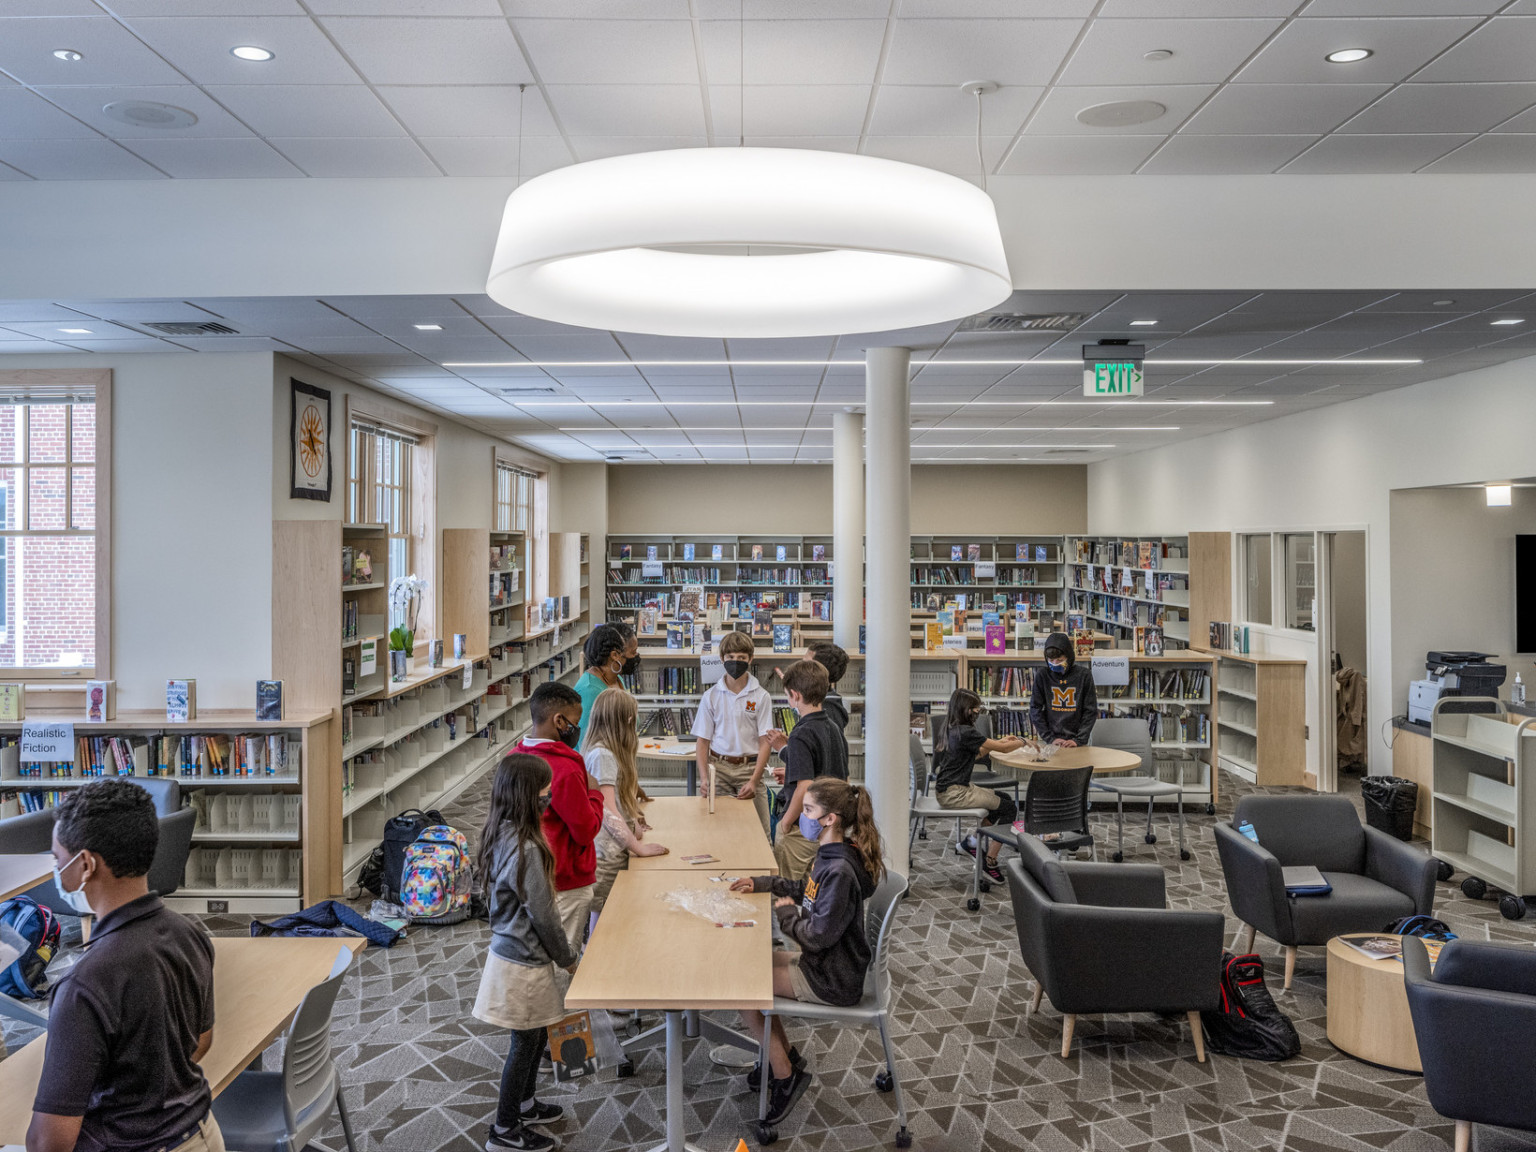 Middle school library with half height bookshelves, flexible tables and seating, arm chairs. Round pendant lights above